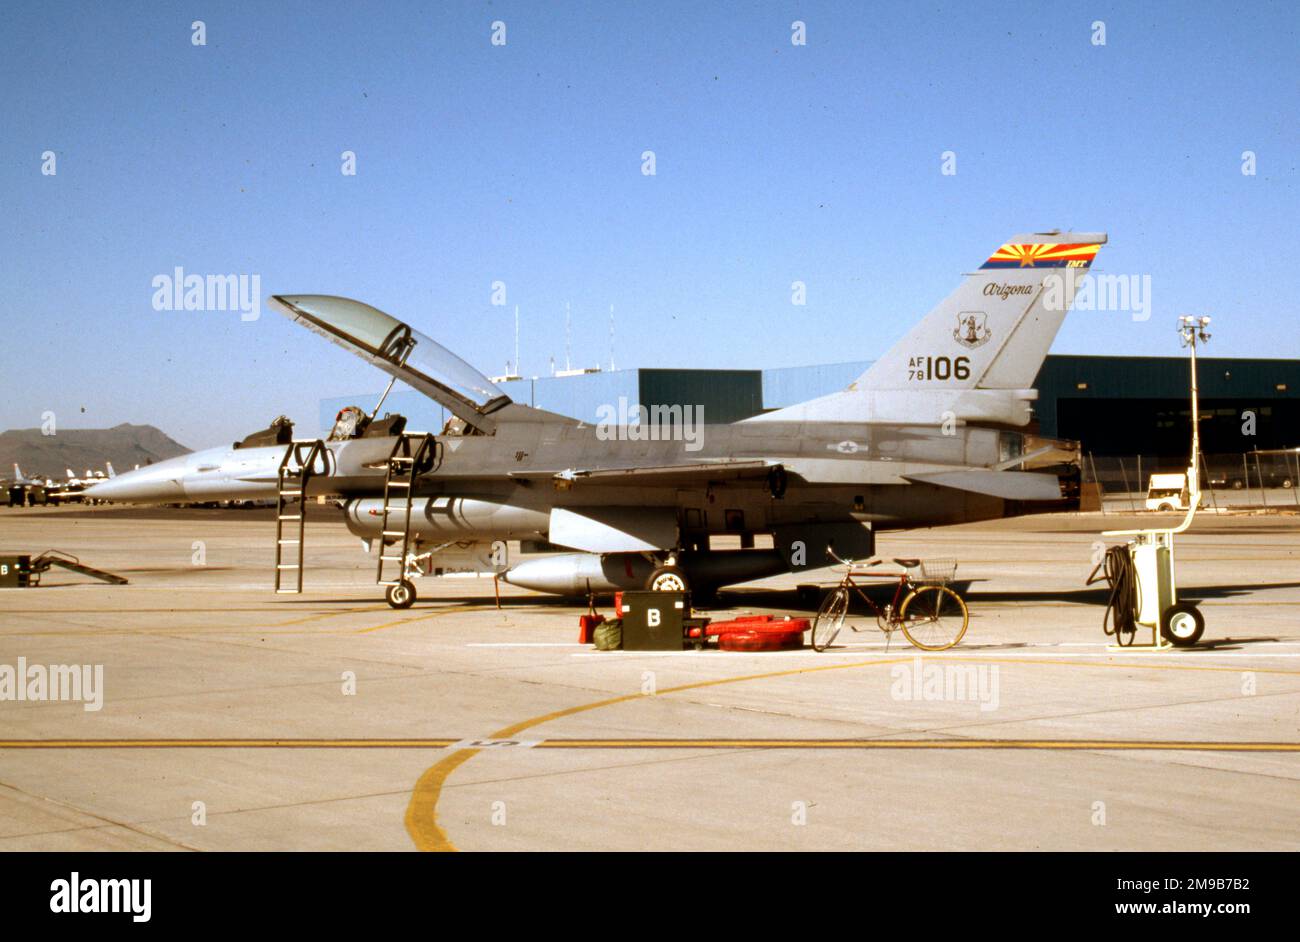 United States Air Force (USAF) - General Dynamics F-16B Block 5 Fighting Falcon 78-0106 (msn 62-32), of the Arizona Air National Guard. Stock Photo